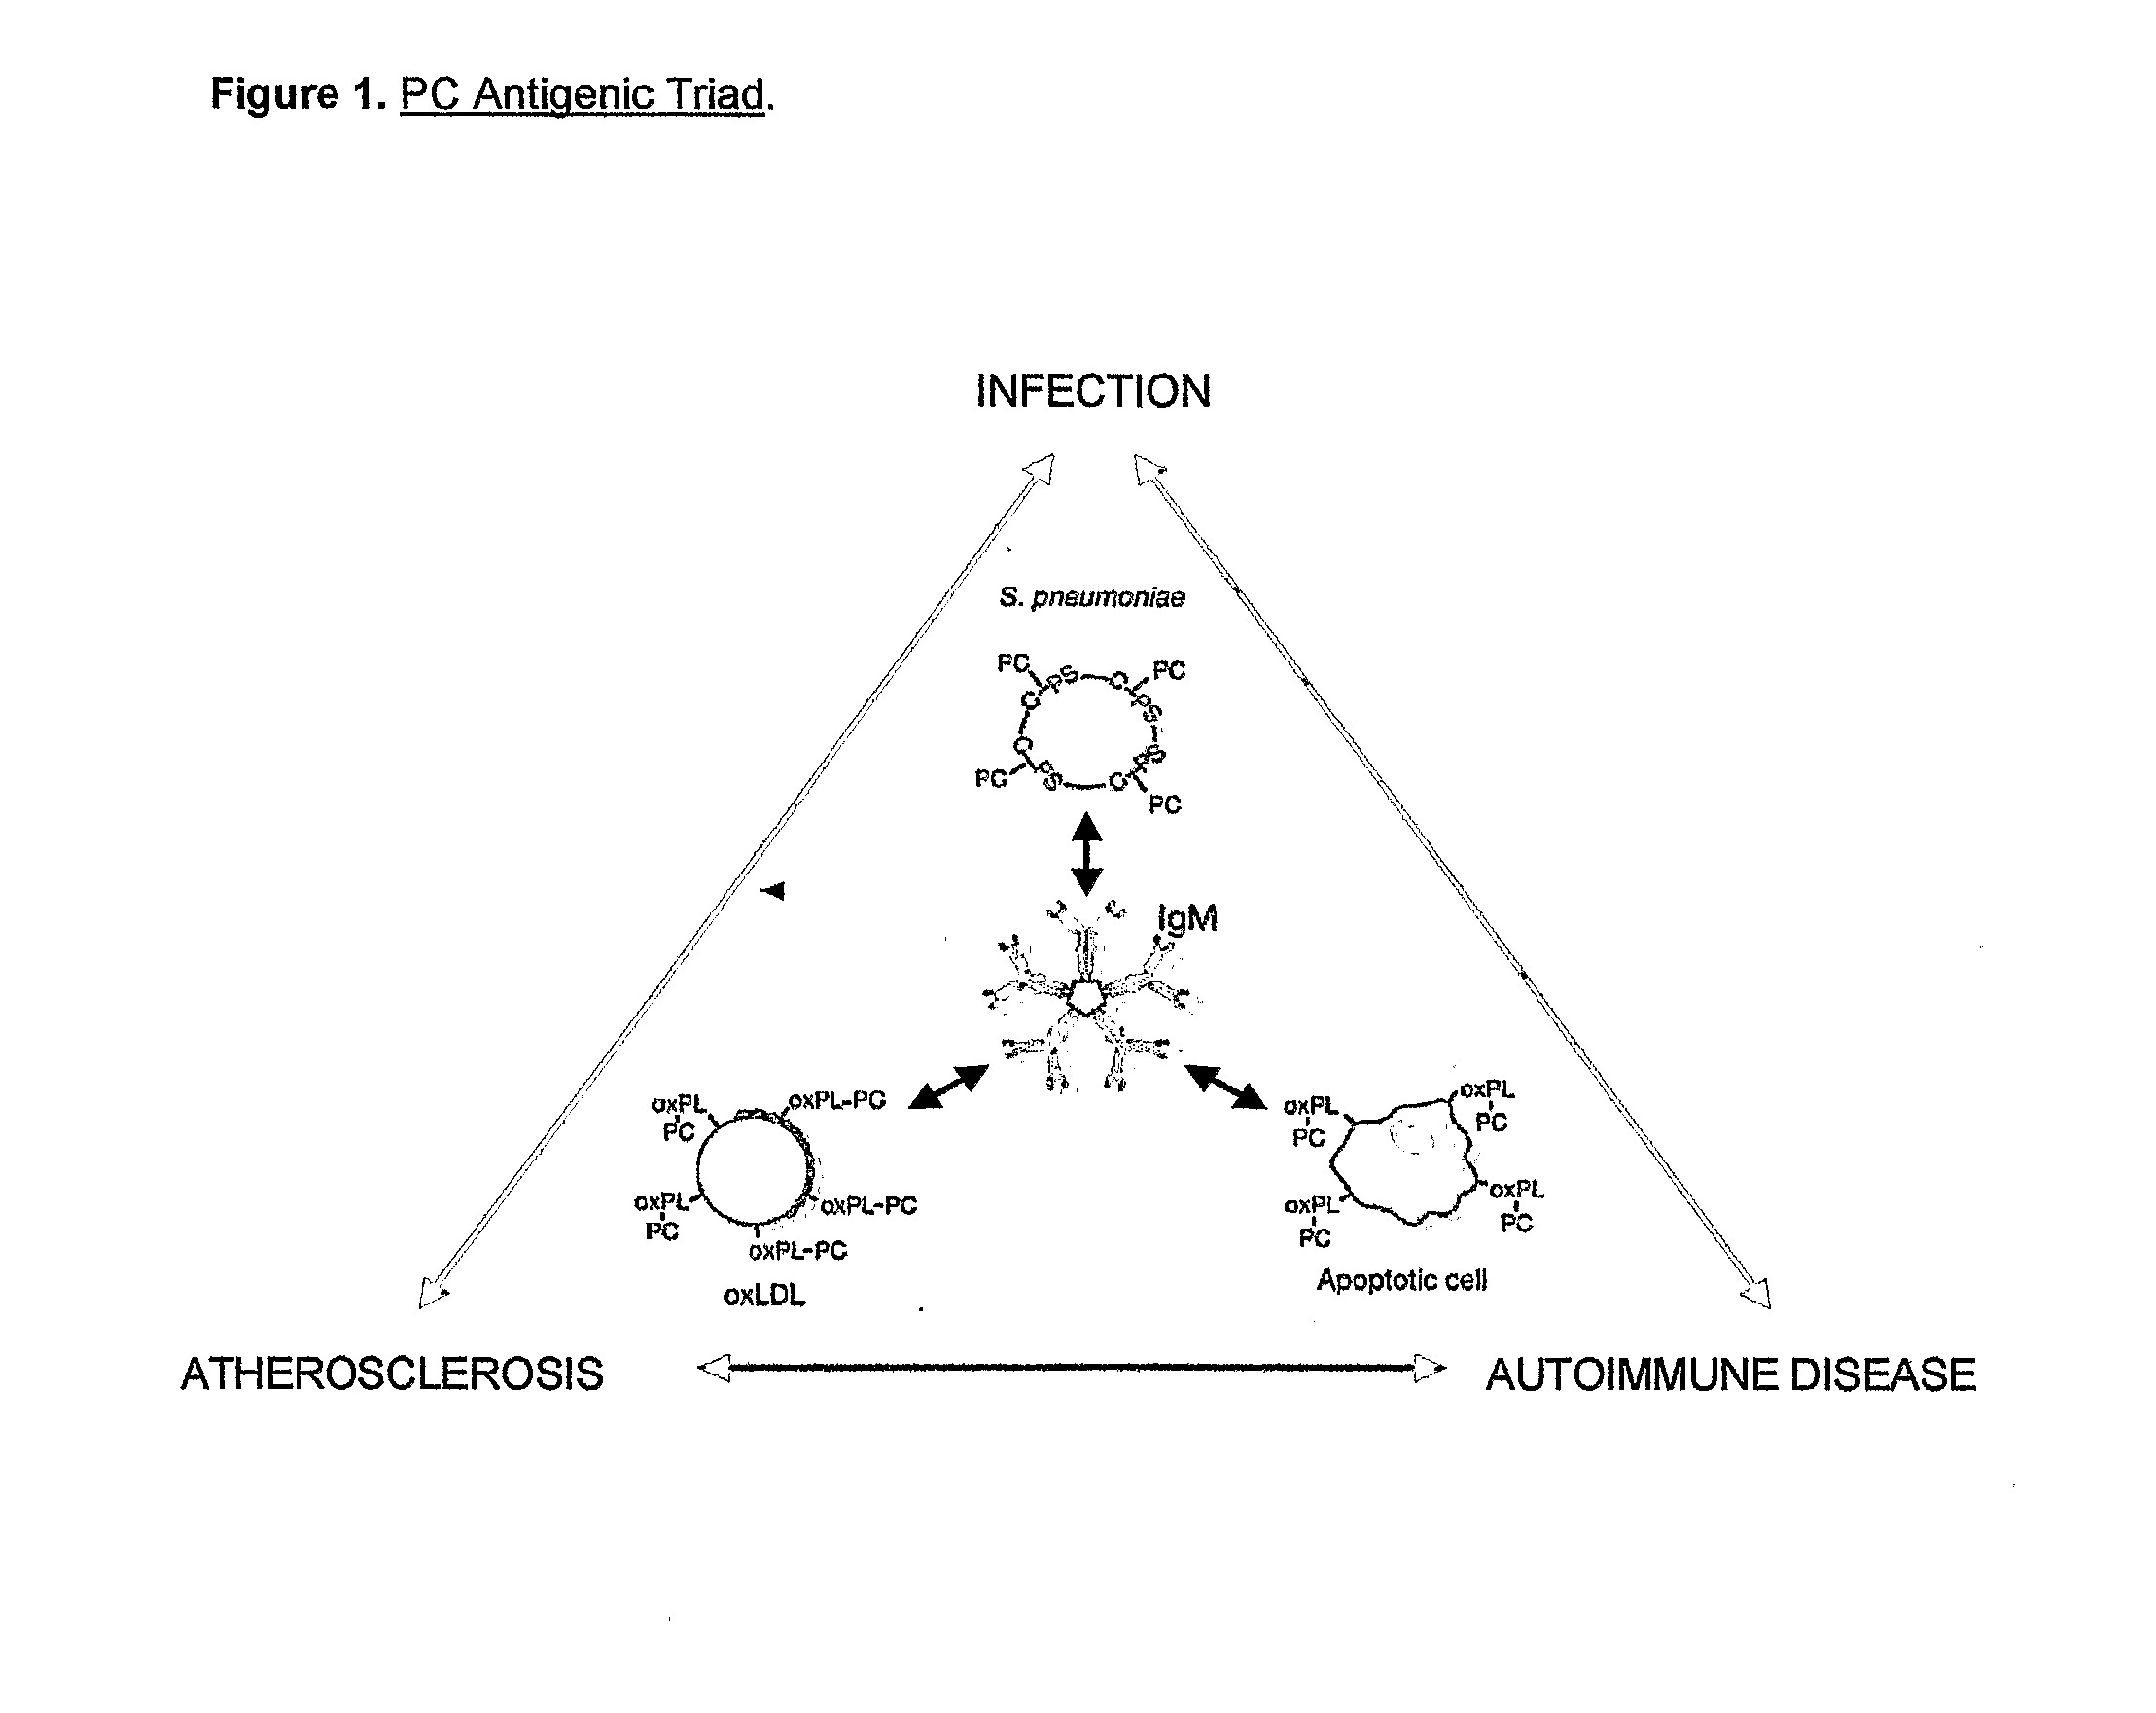 Methods For Reducing the Symptoms of Autoimmunity and Inflammation Using Binding Proteins Against Antigens Exposed on Dead or Dying Cells